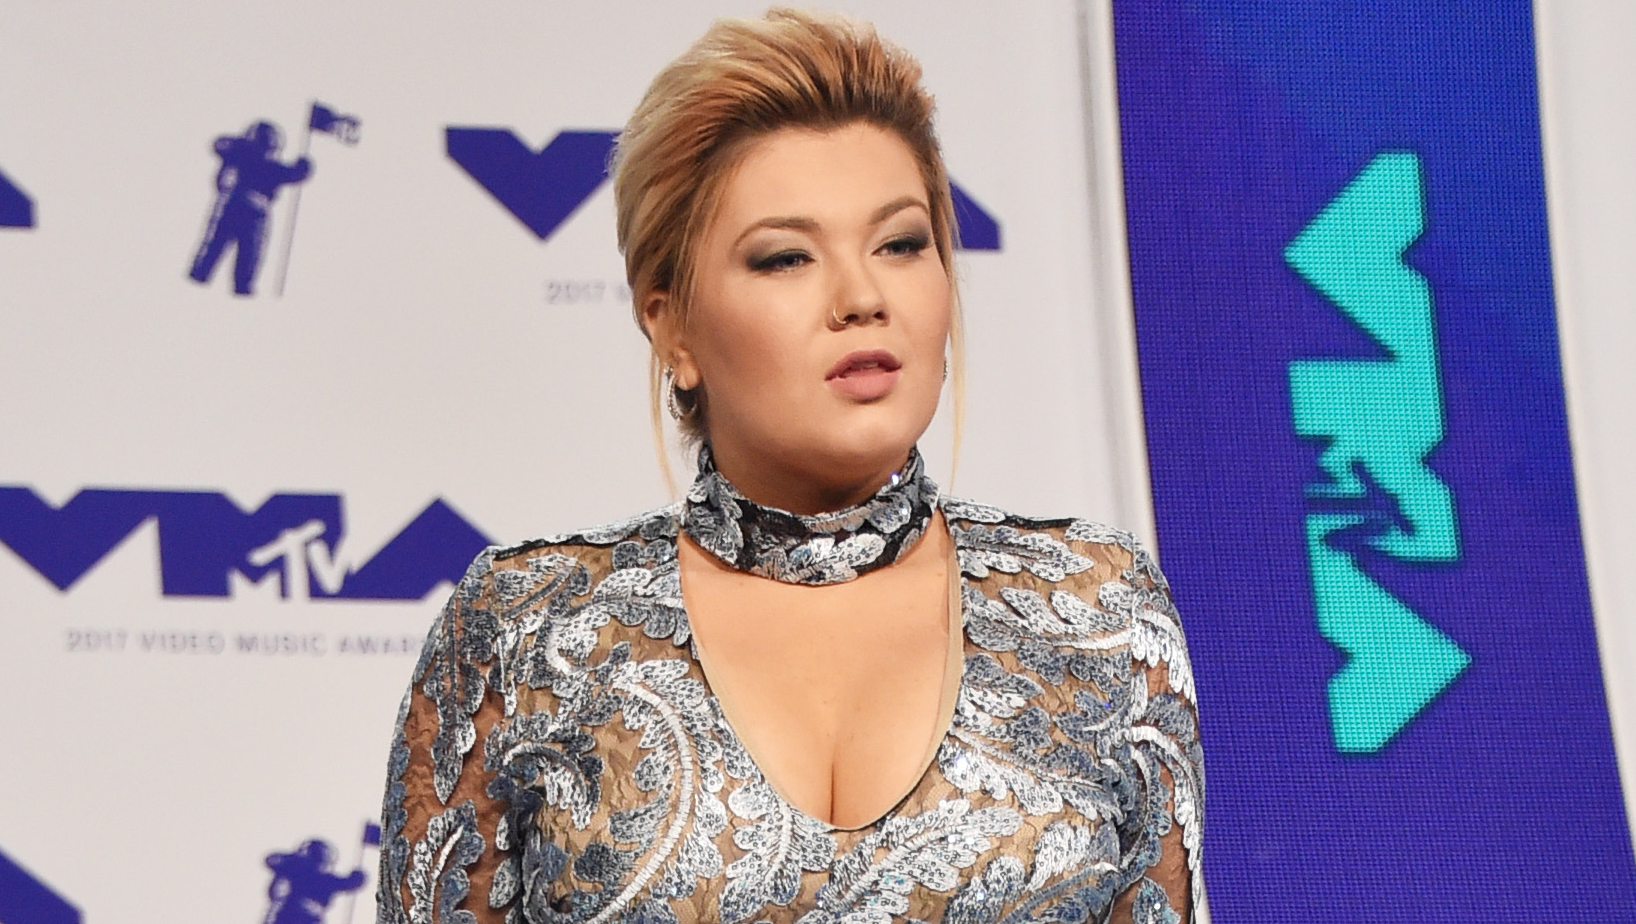 ‘Teen Mom’ Star Amber Portwood’s Emails To Be Used As Evidence In Criminal Case